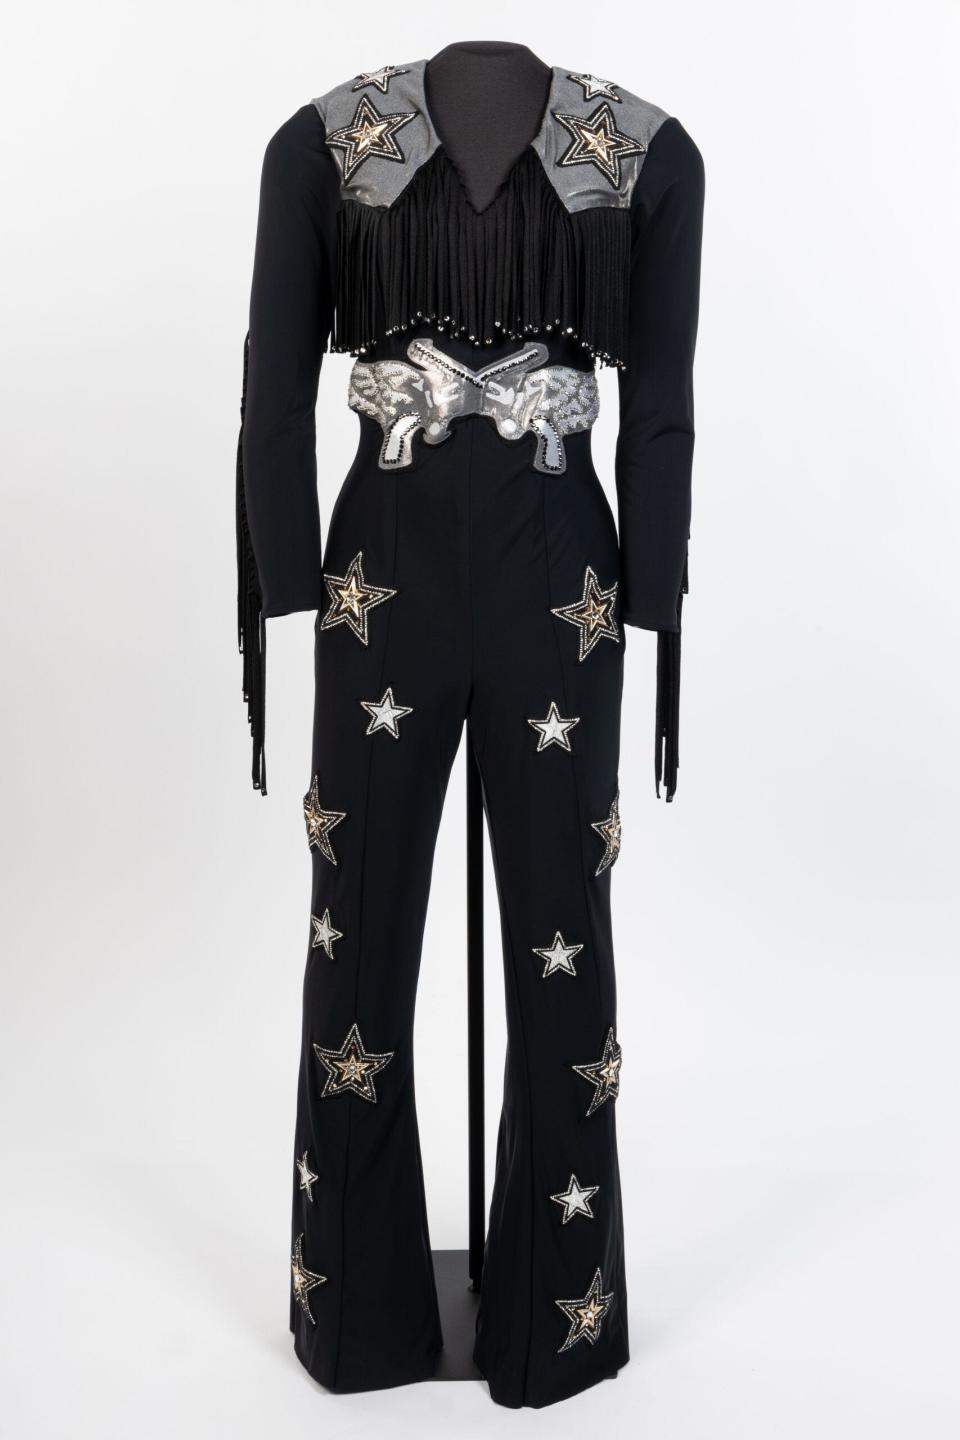 Miranda Lambert wore this jumpsuit when she appeared on CBS-TV’s New Year’s Eve Live: Nashville’s Big Bash, December 31, 2021.